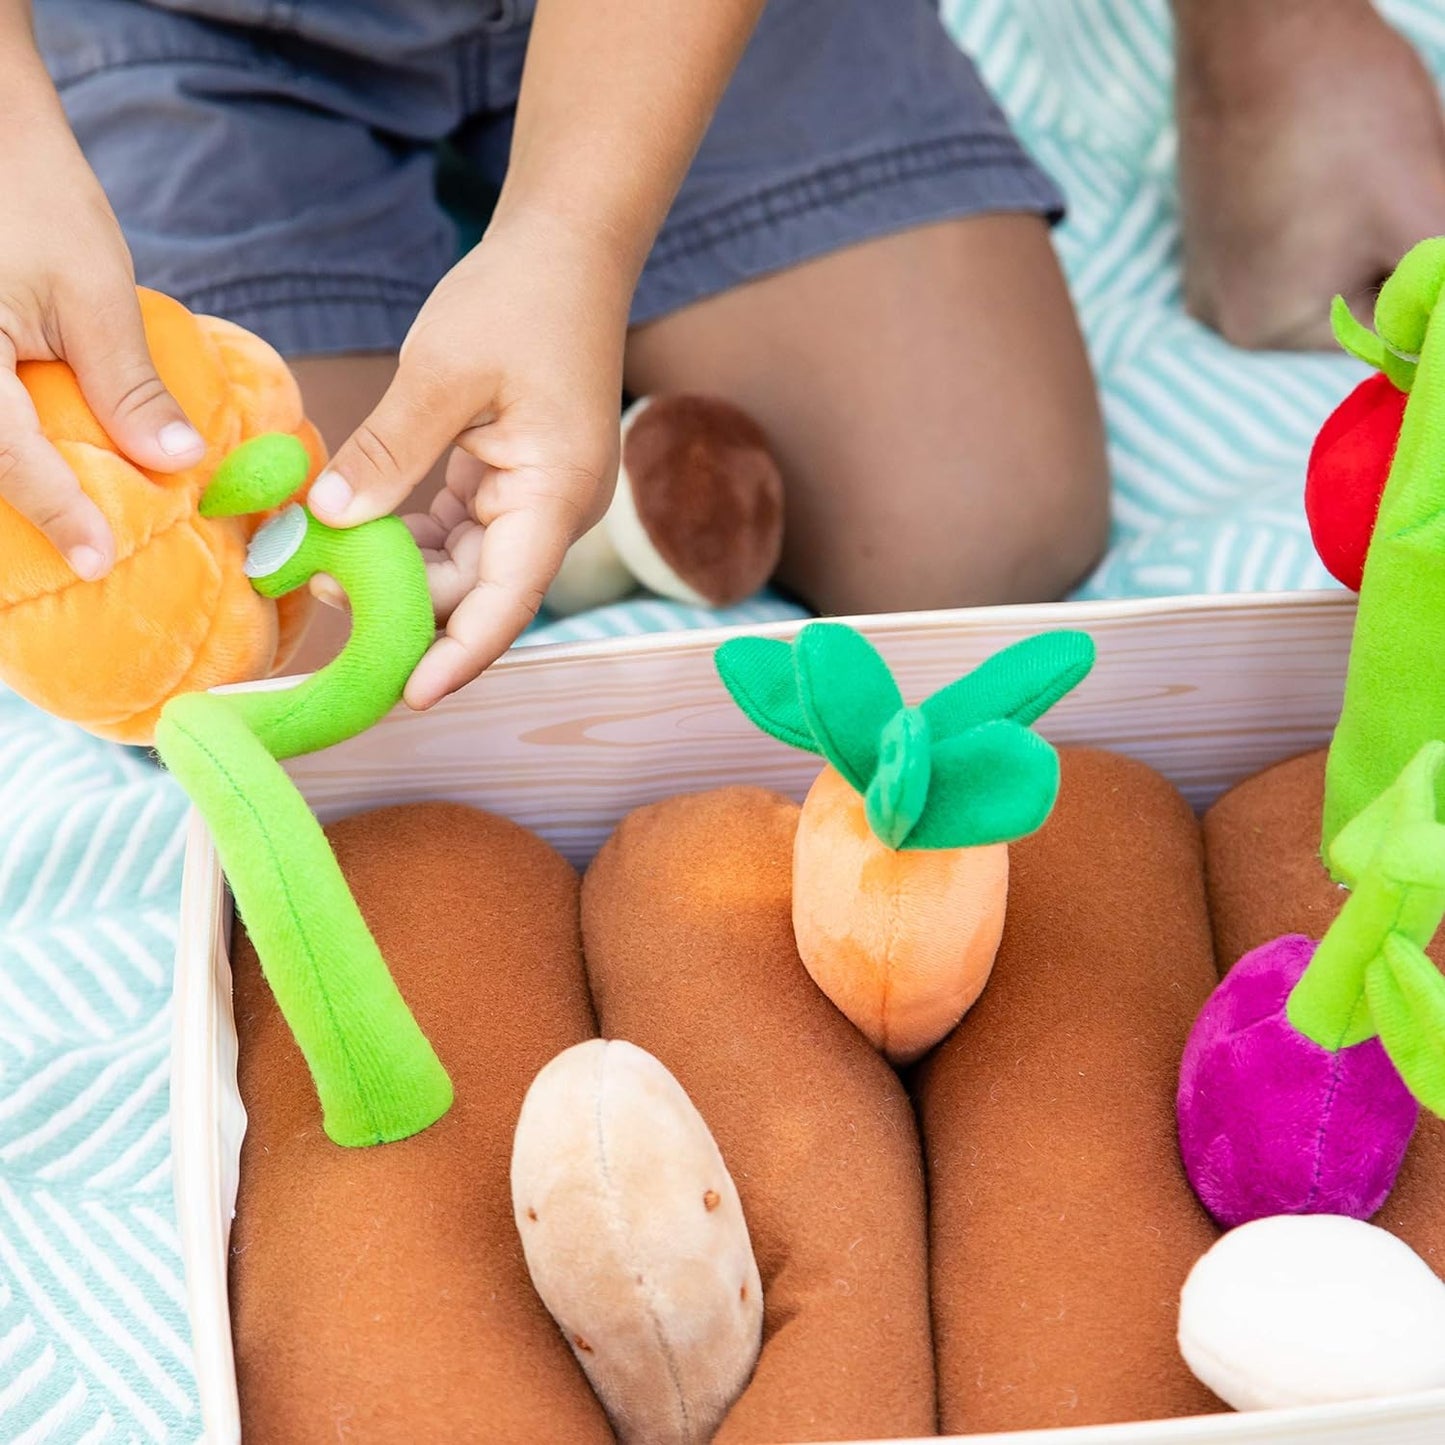 "Delightful Plush Vegetable Garden Set: Enhance Early Learning Skills with 13-Piece Pretend Food, Perfect for Ages 2 and Up!"